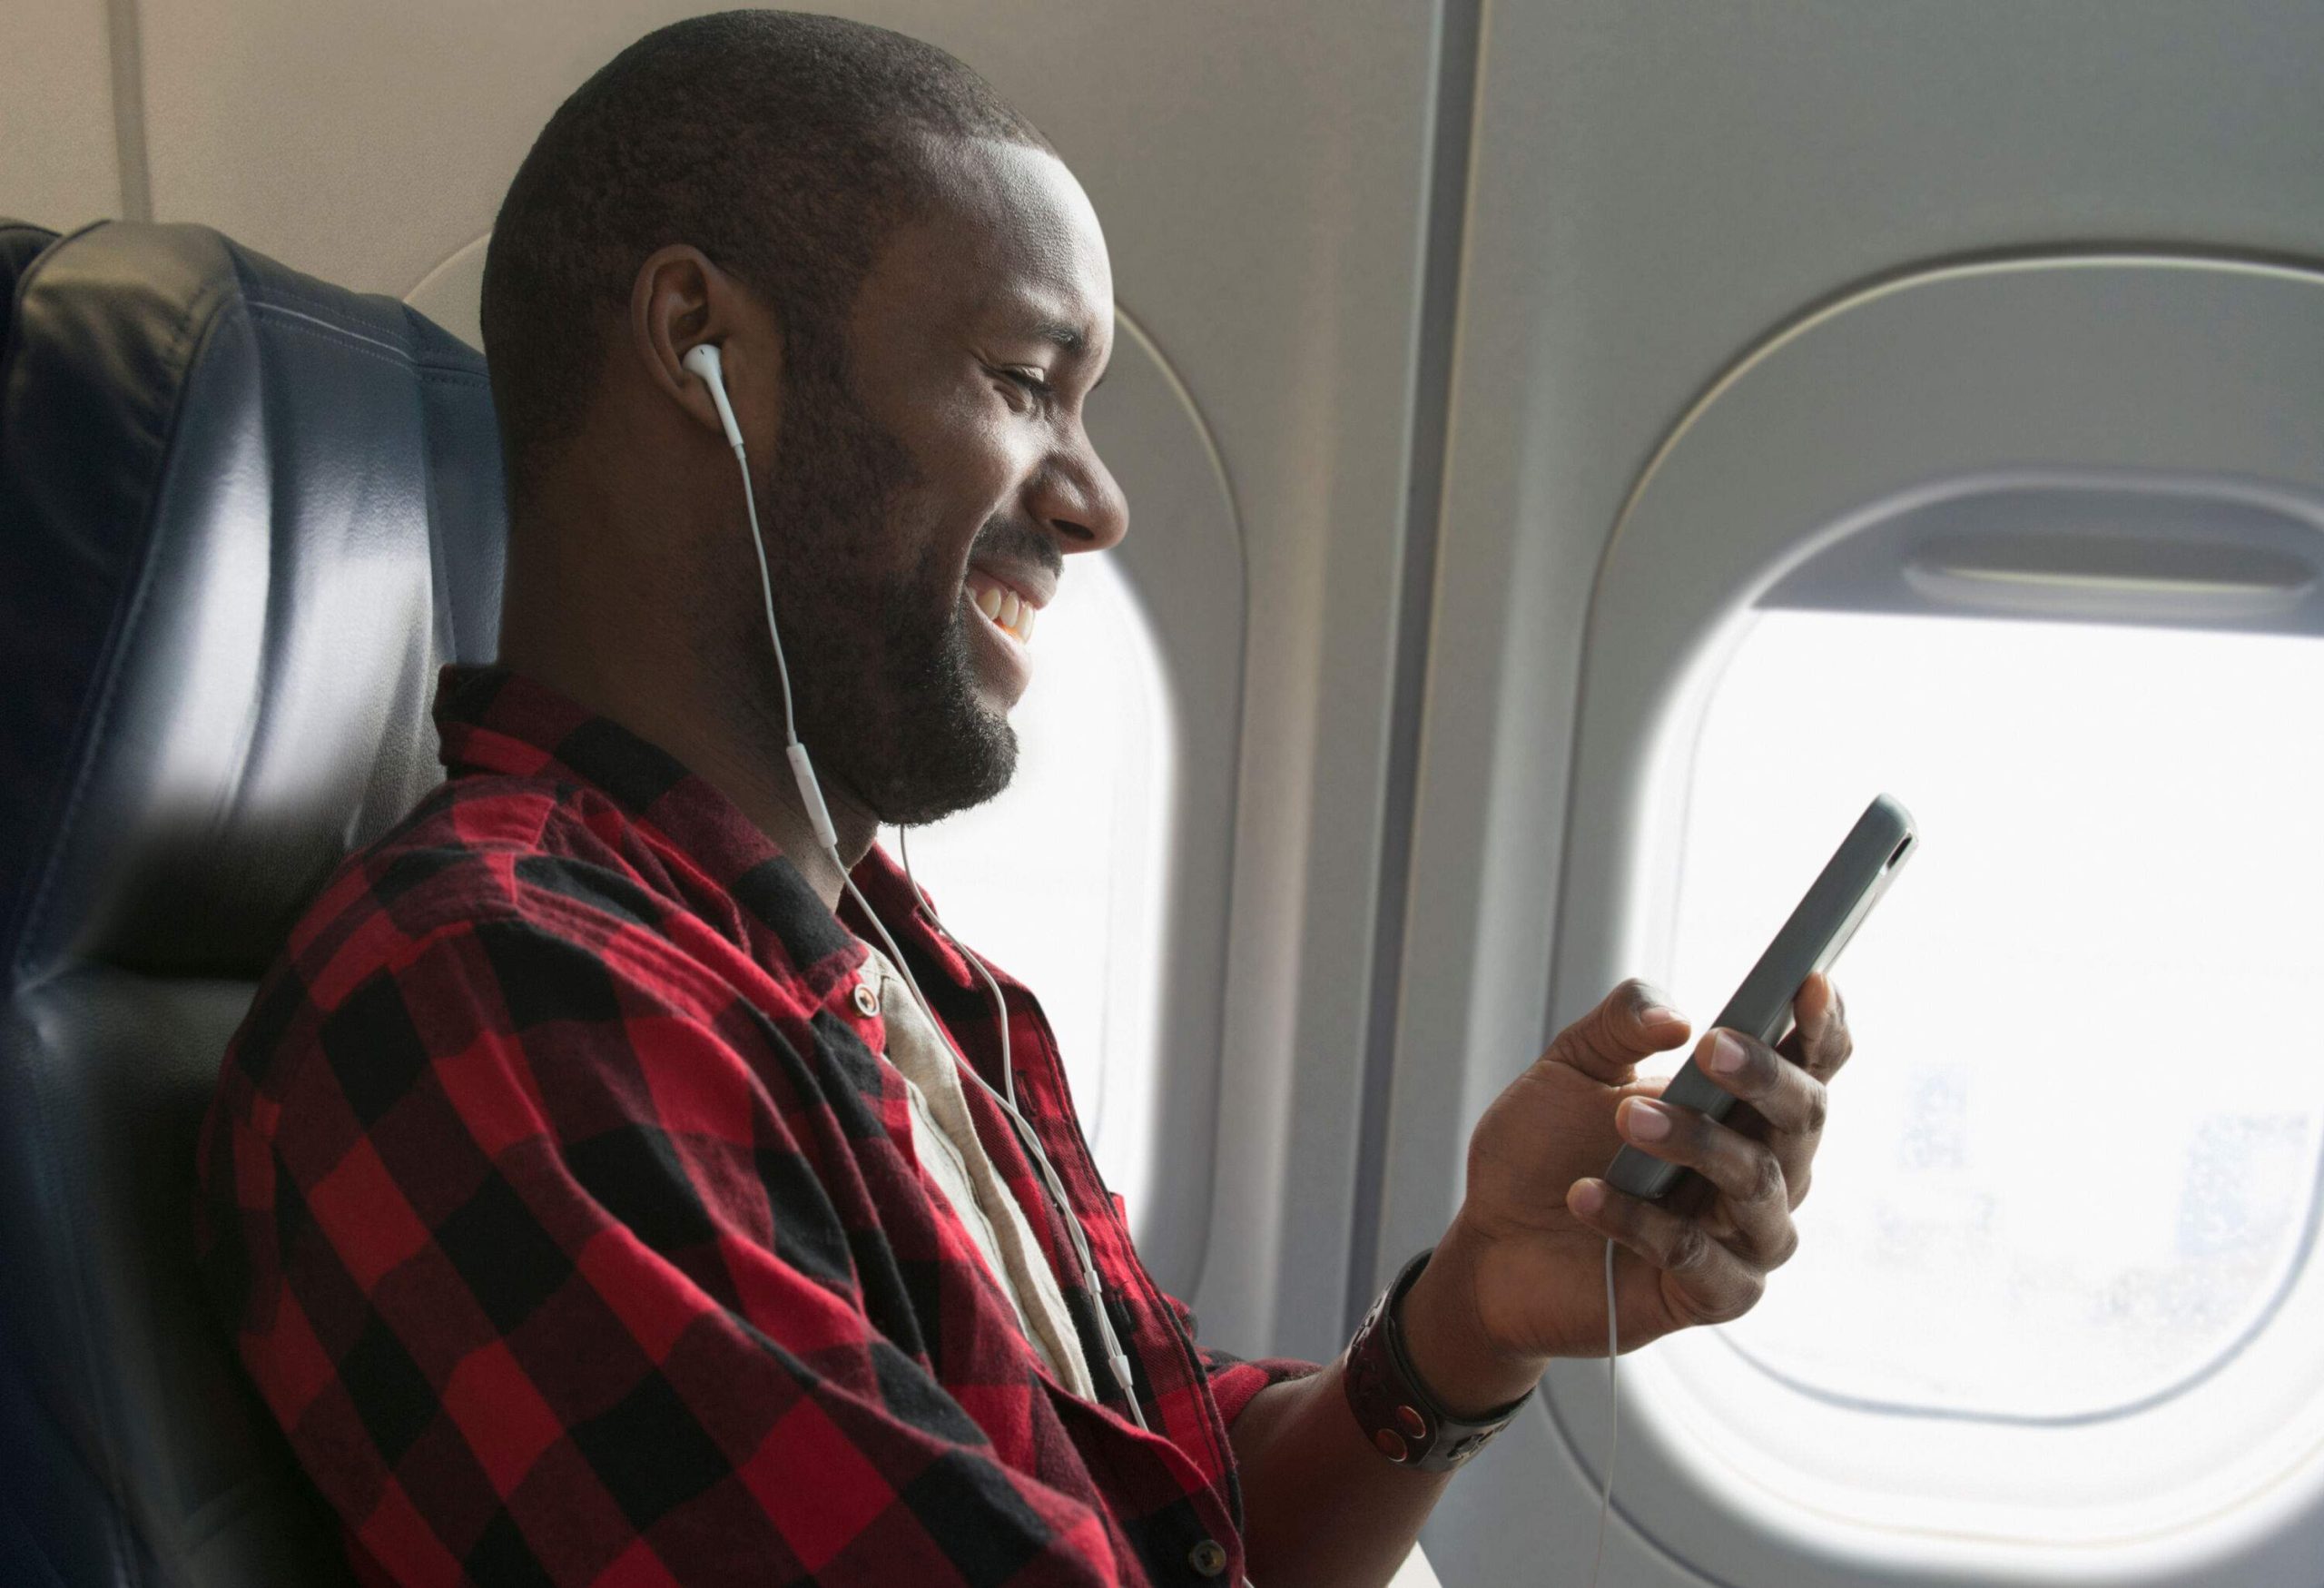 A male passenger with earphones smiling while taking a look at his smartphone on the plane's window seat.